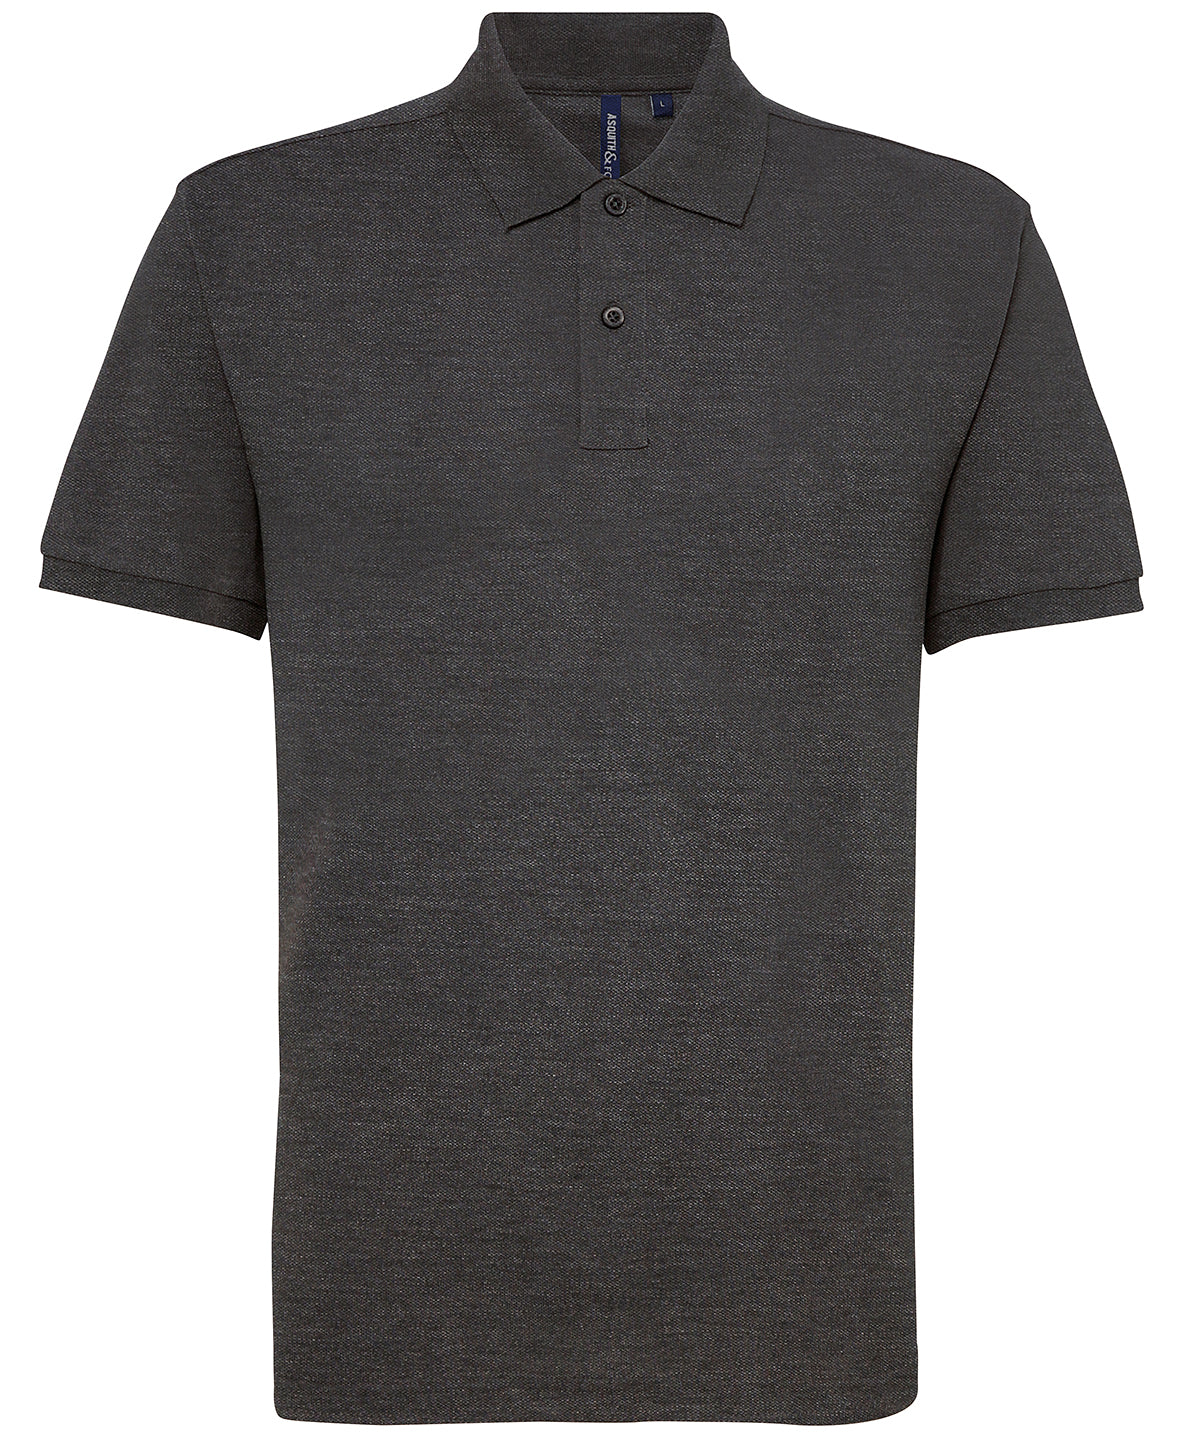 Personalised Polo Shirts - Black Asquith & Fox Men’s polycotton blend polo